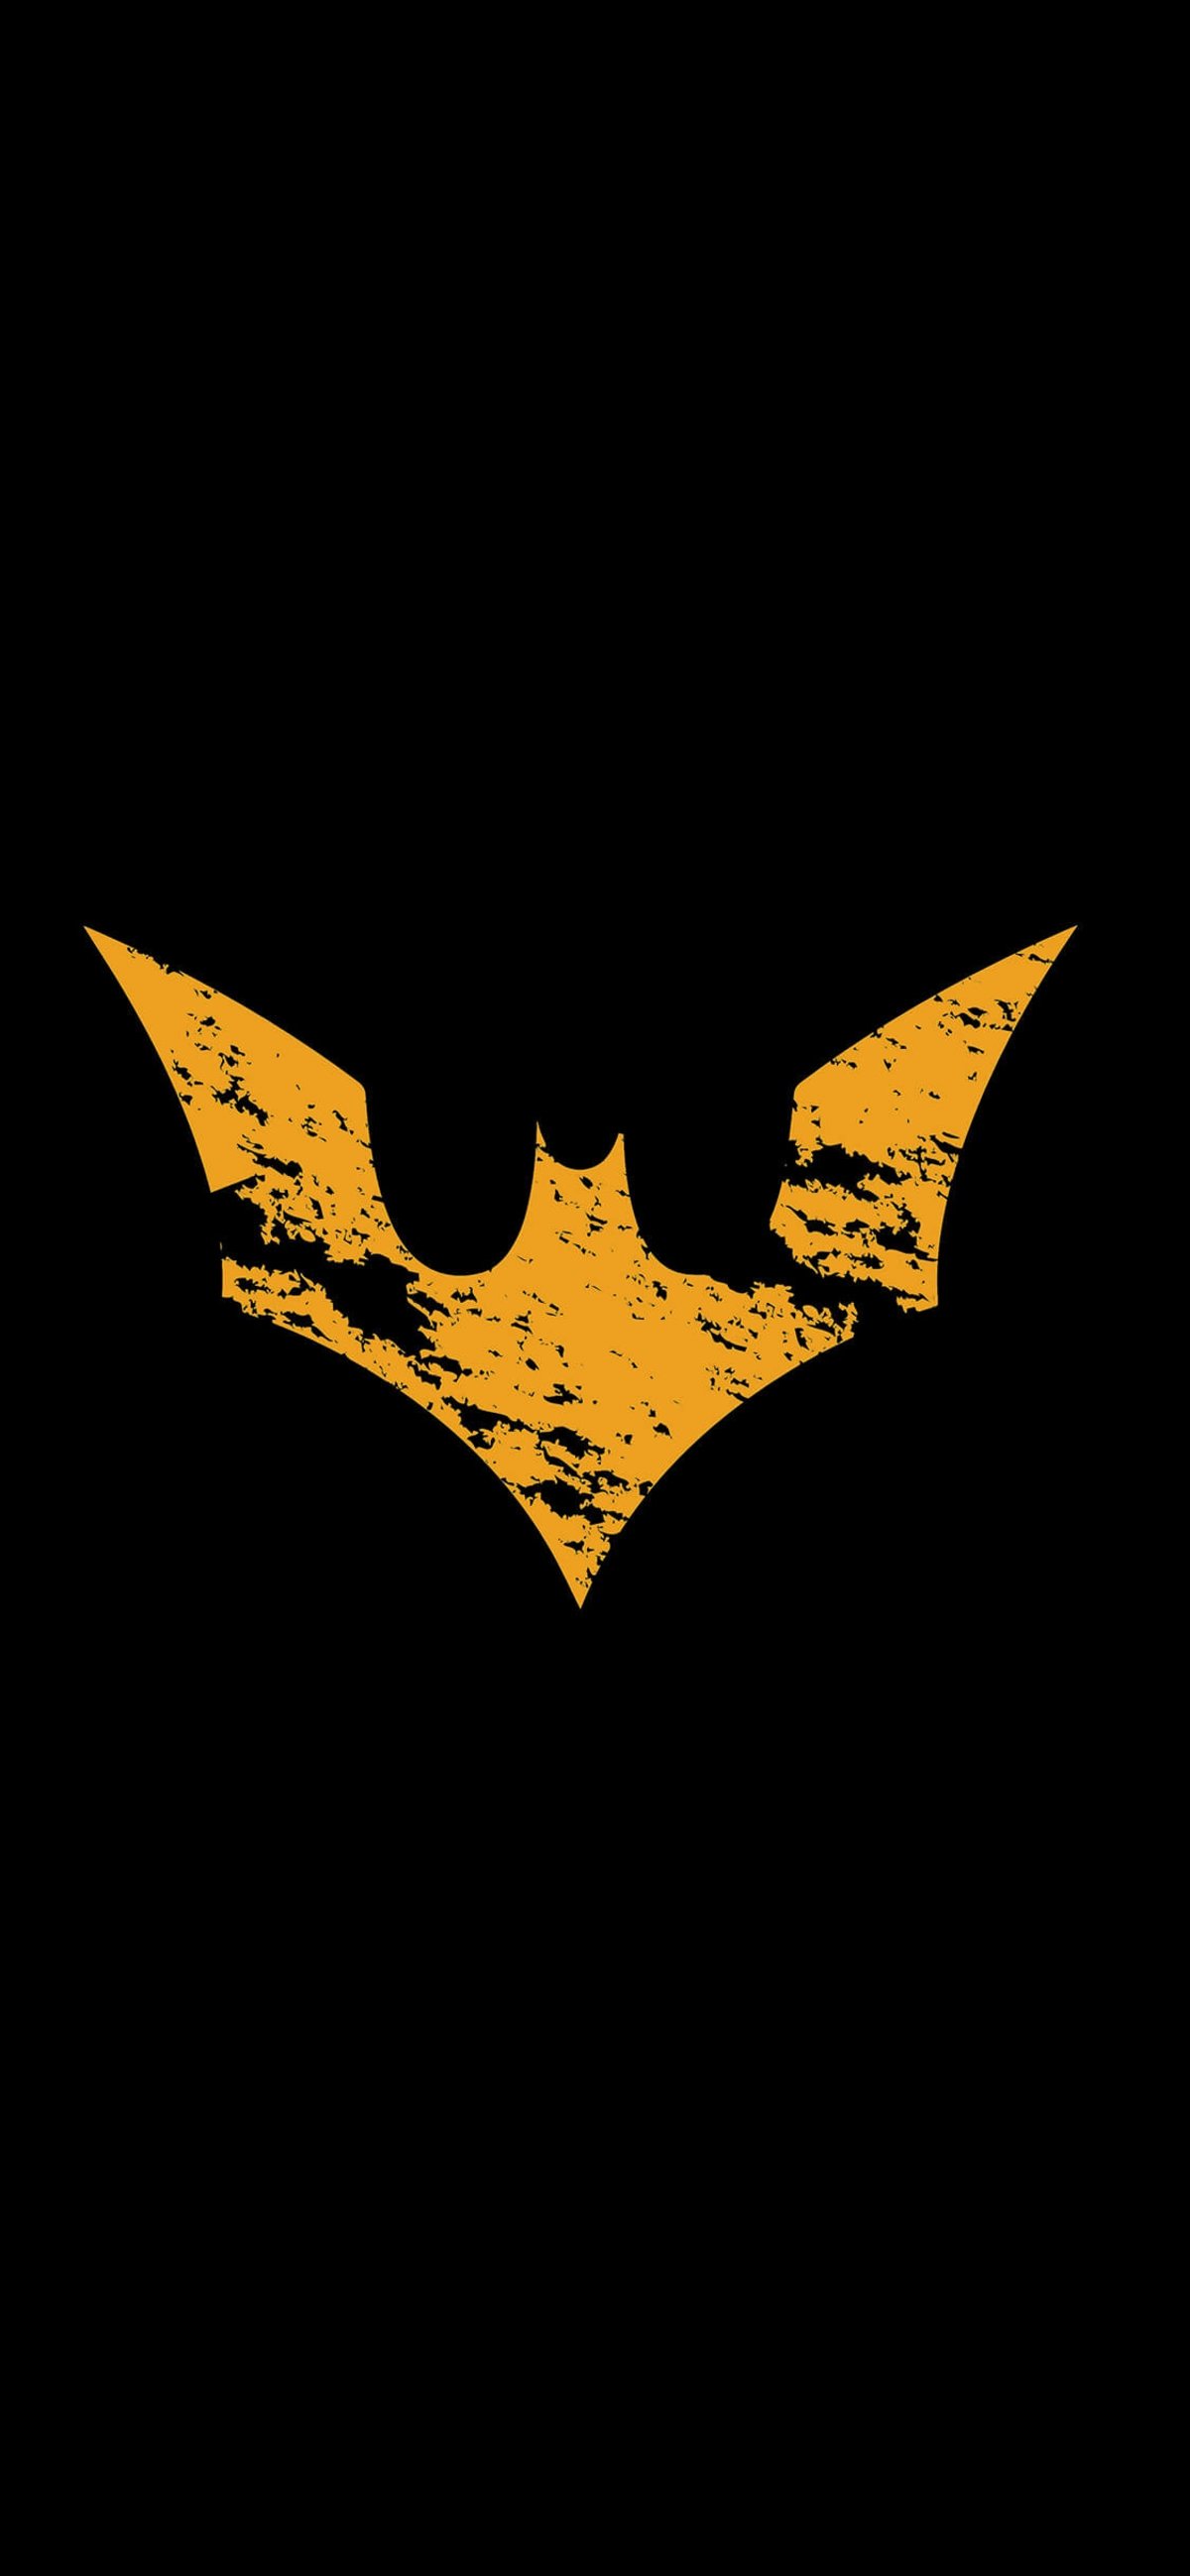 The best Batman wallpapers that you can download - Gearrice